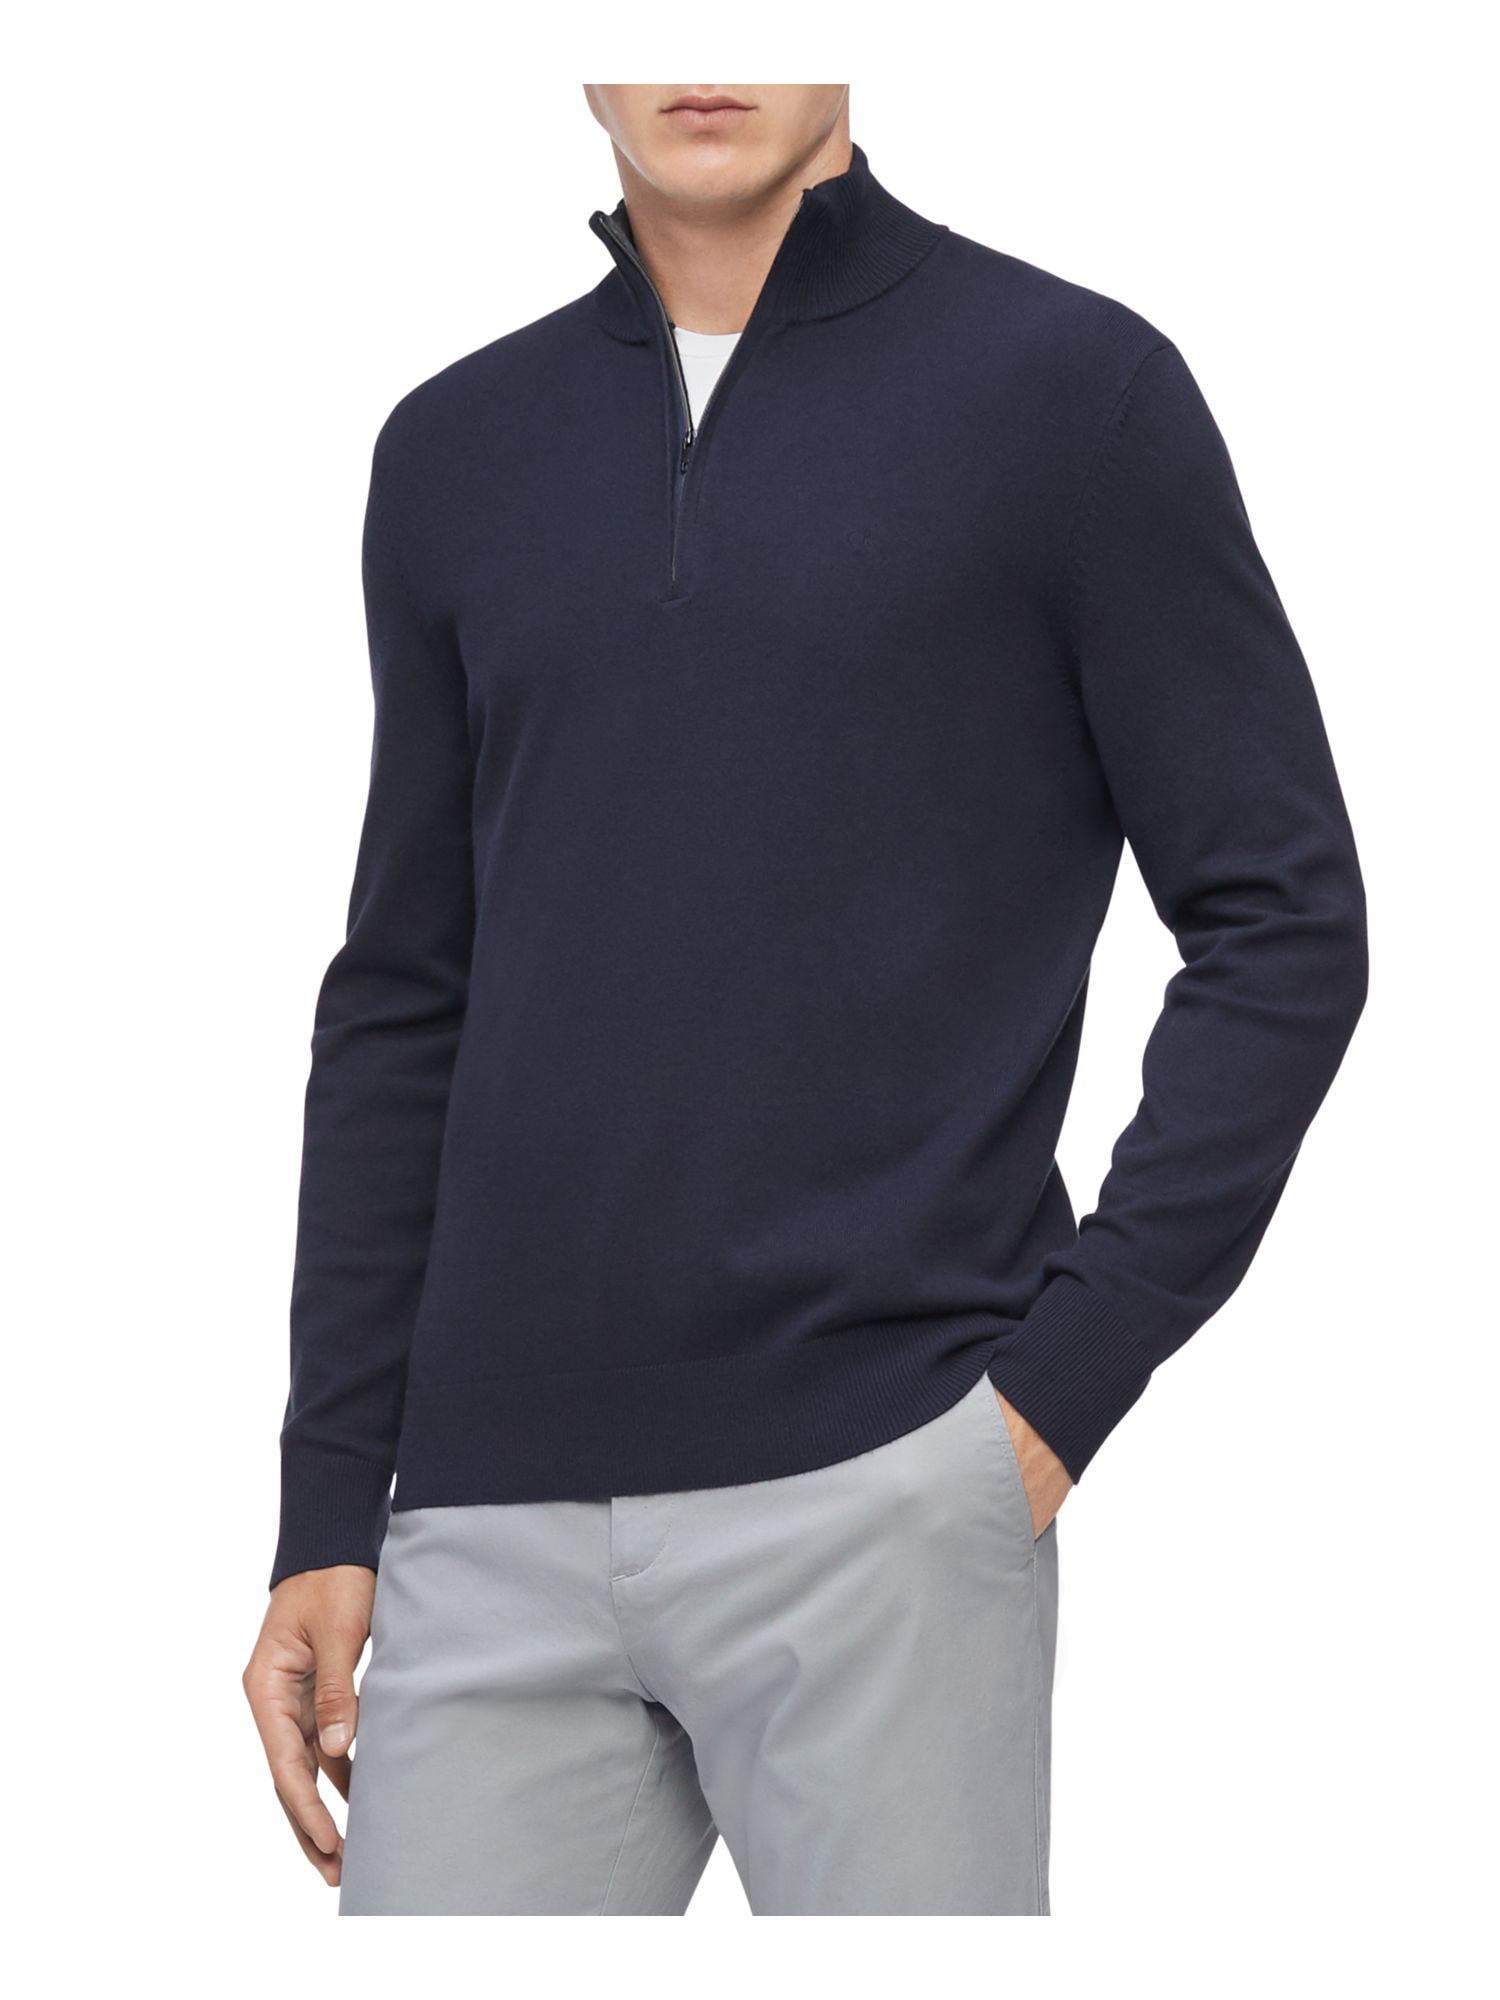 CALVIN KLEIN Mens Navy Collared Classic Fit Quarter-Zip Pullover Sweater S  